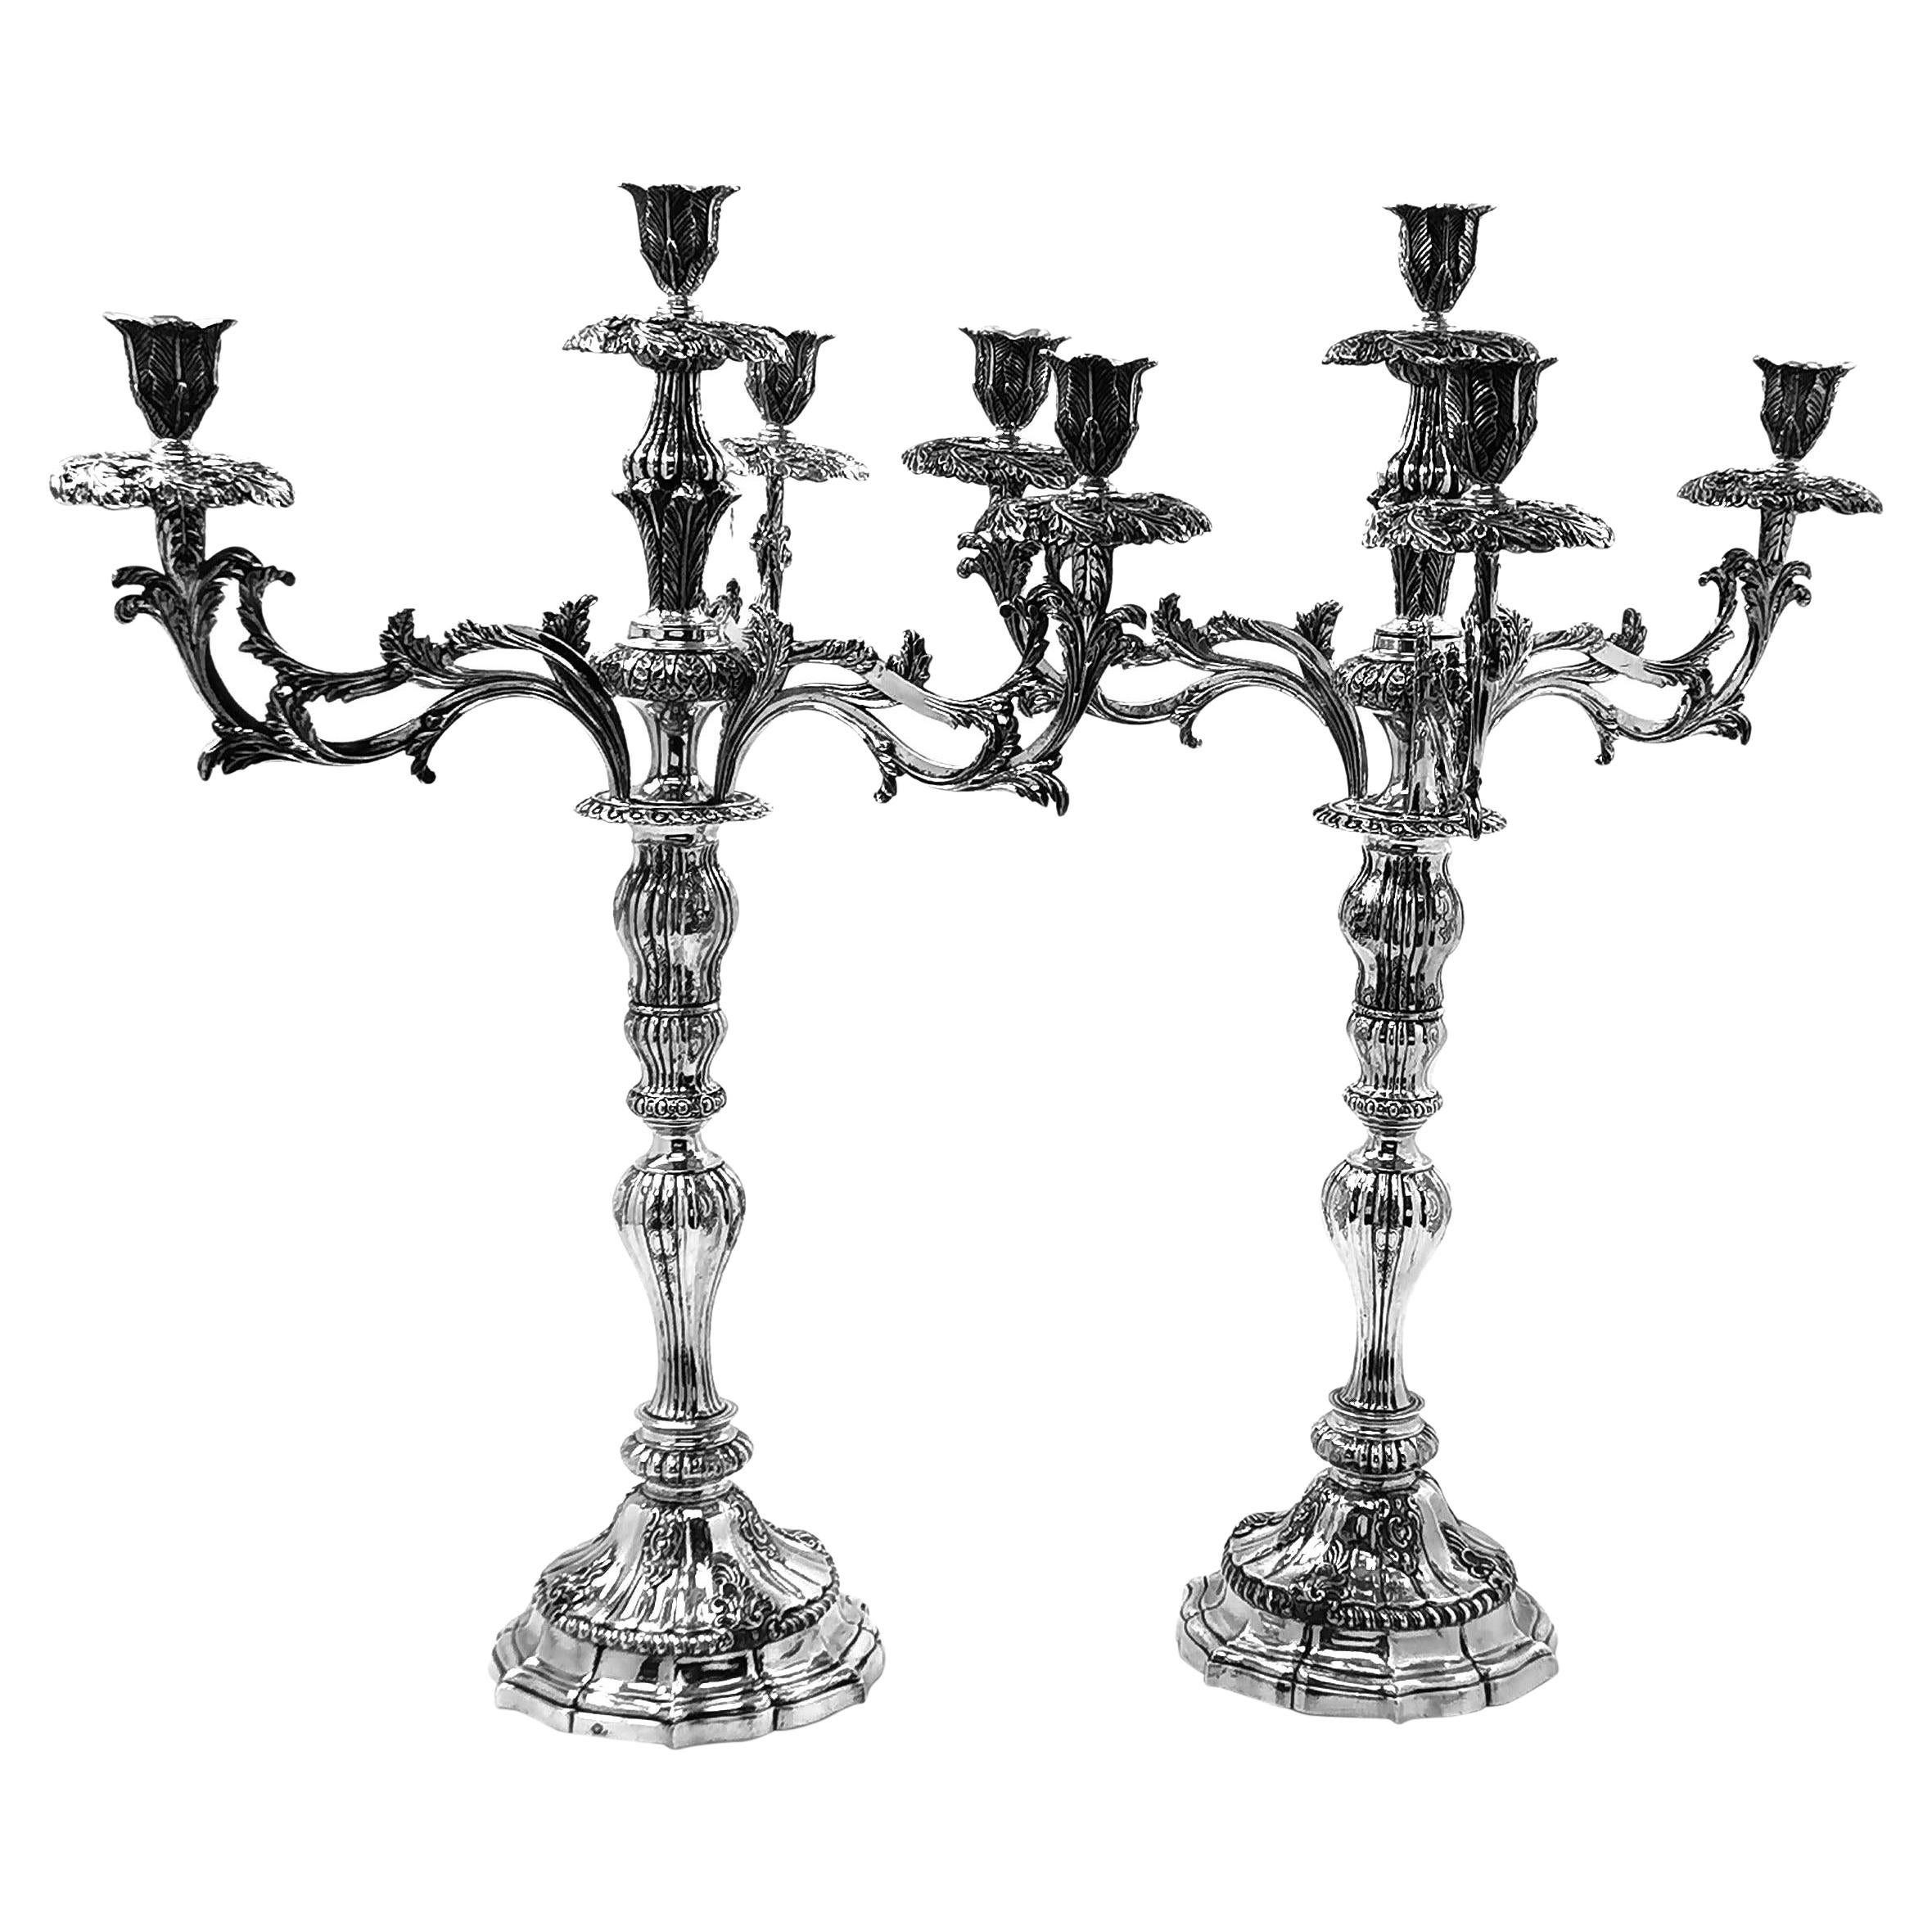 Rare Pair of Antique Portuguese Silver Candelabra c. 1800 19th Candle Holders For Sale